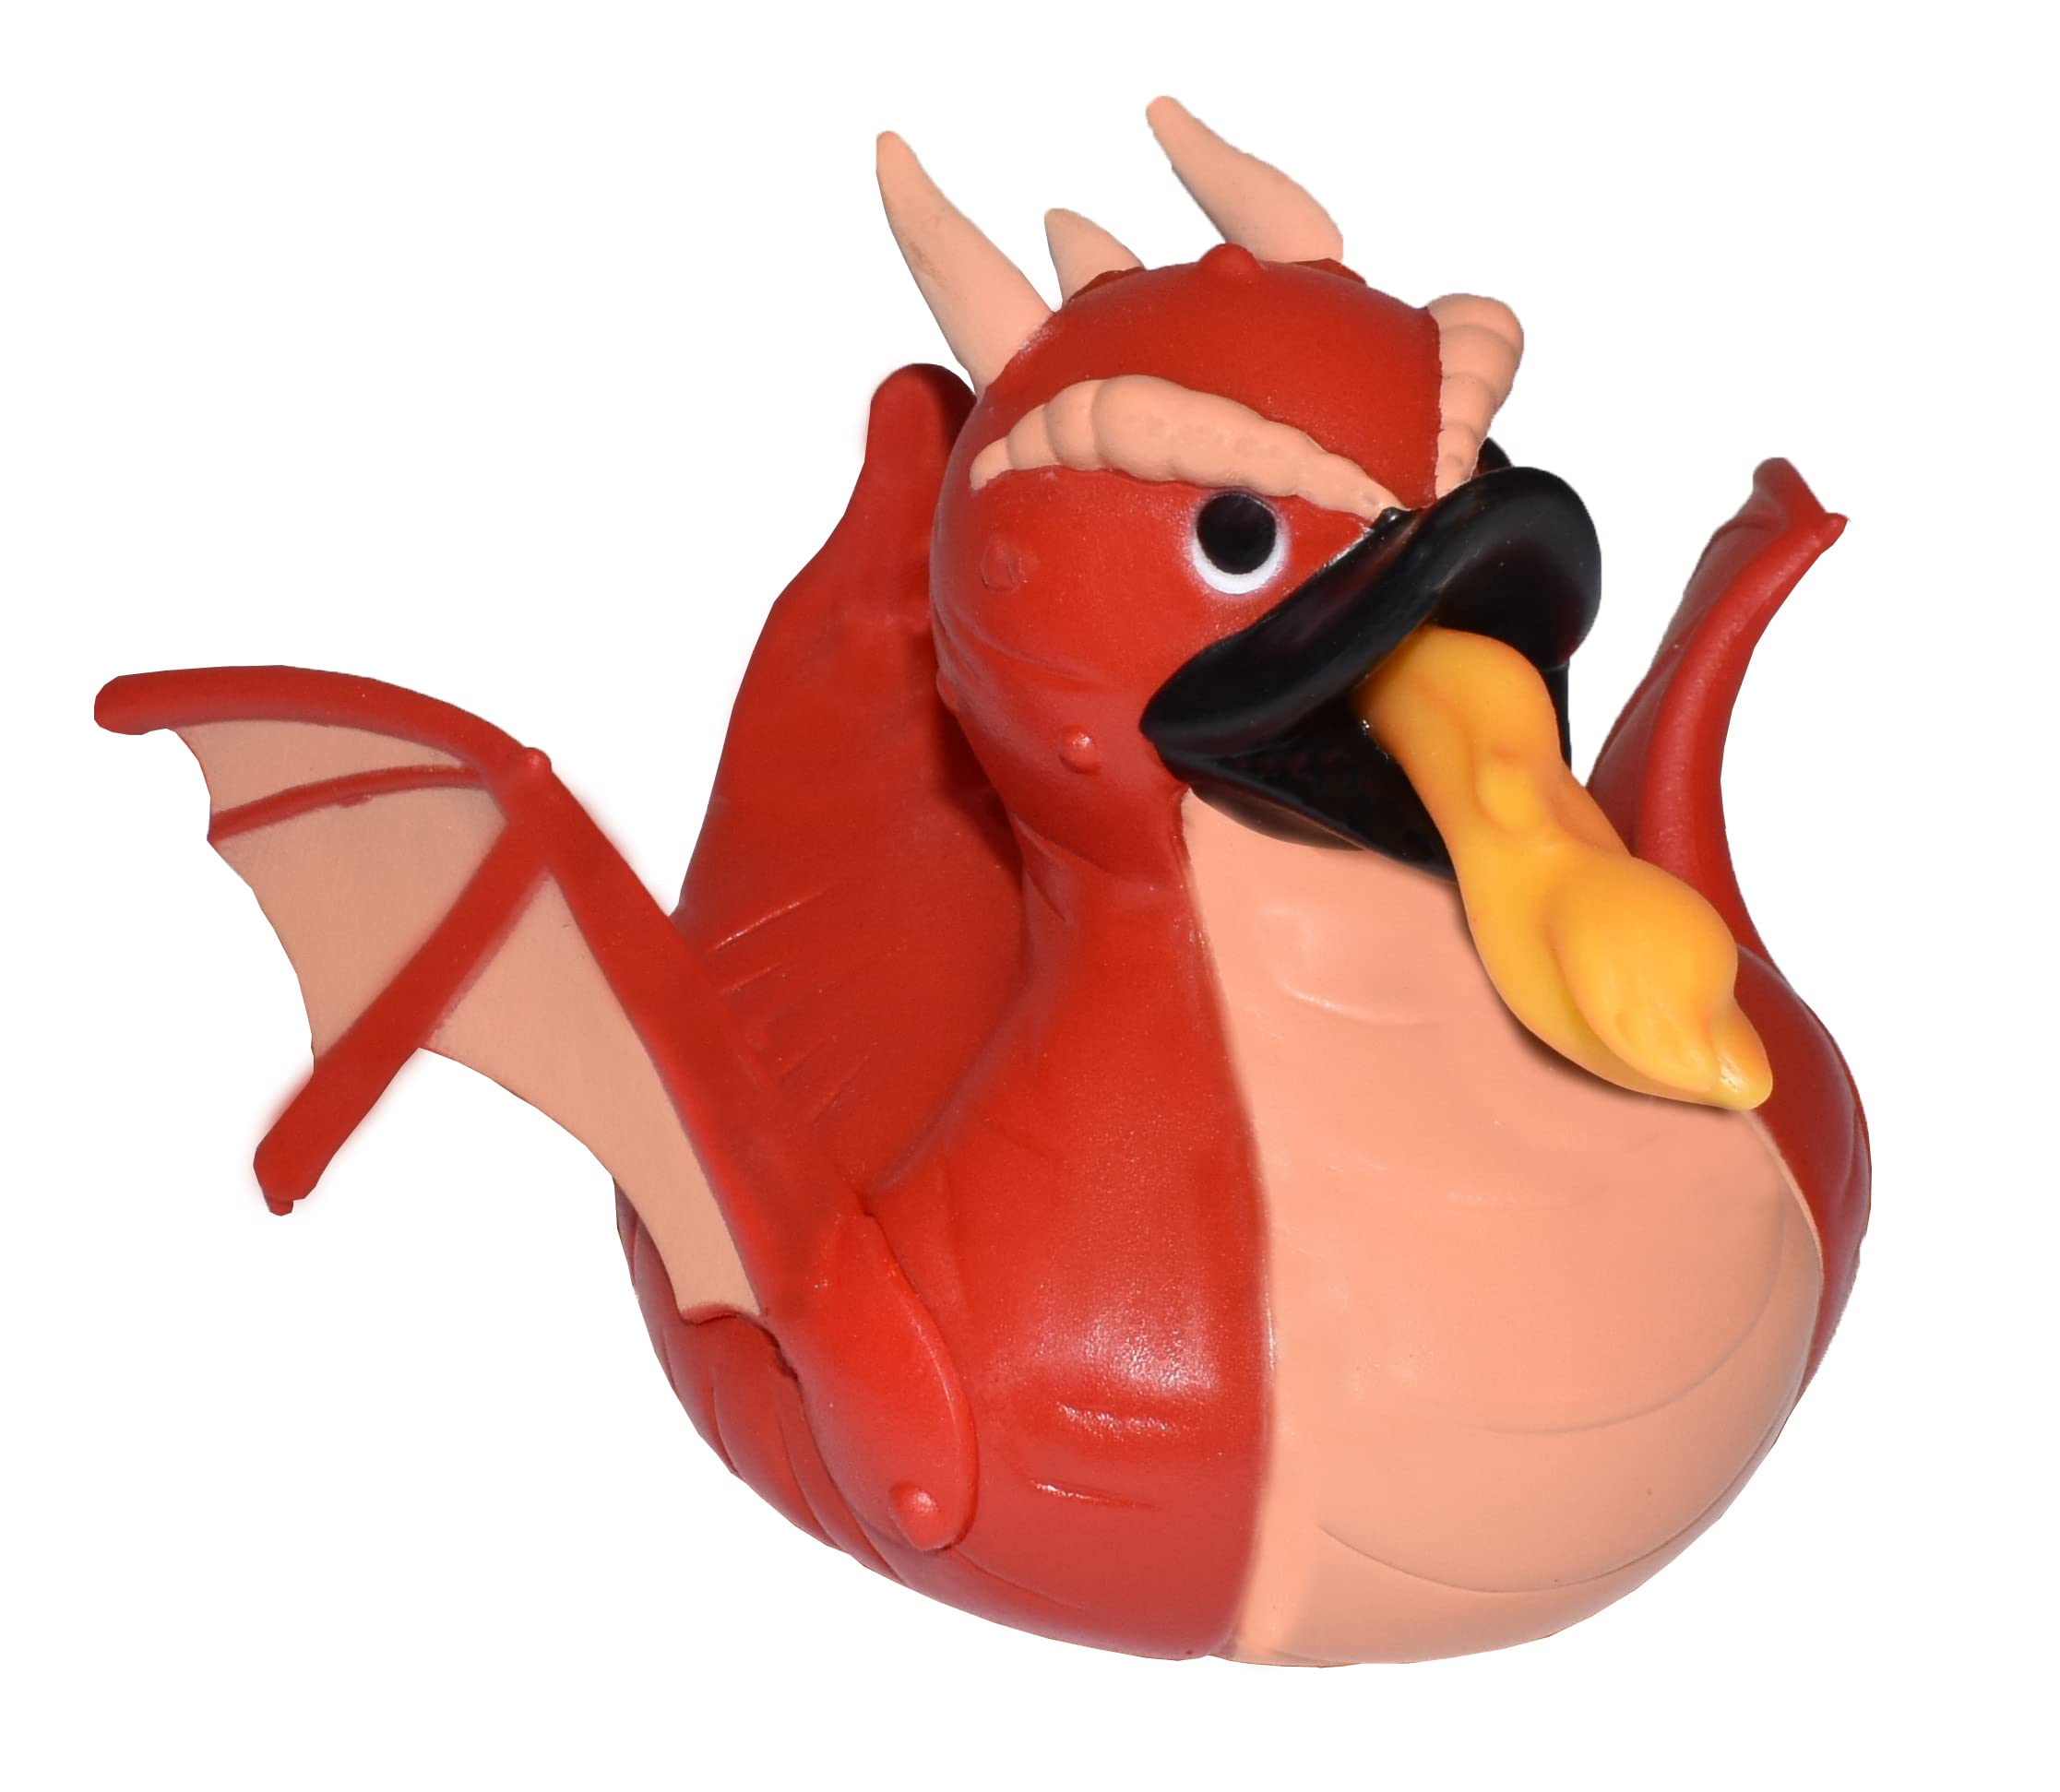 WILD REPUBLIC Rubber Ducks, Bath Toys, Kids Gifts, Pool Toys, Water Toys, Red Dragon, 4